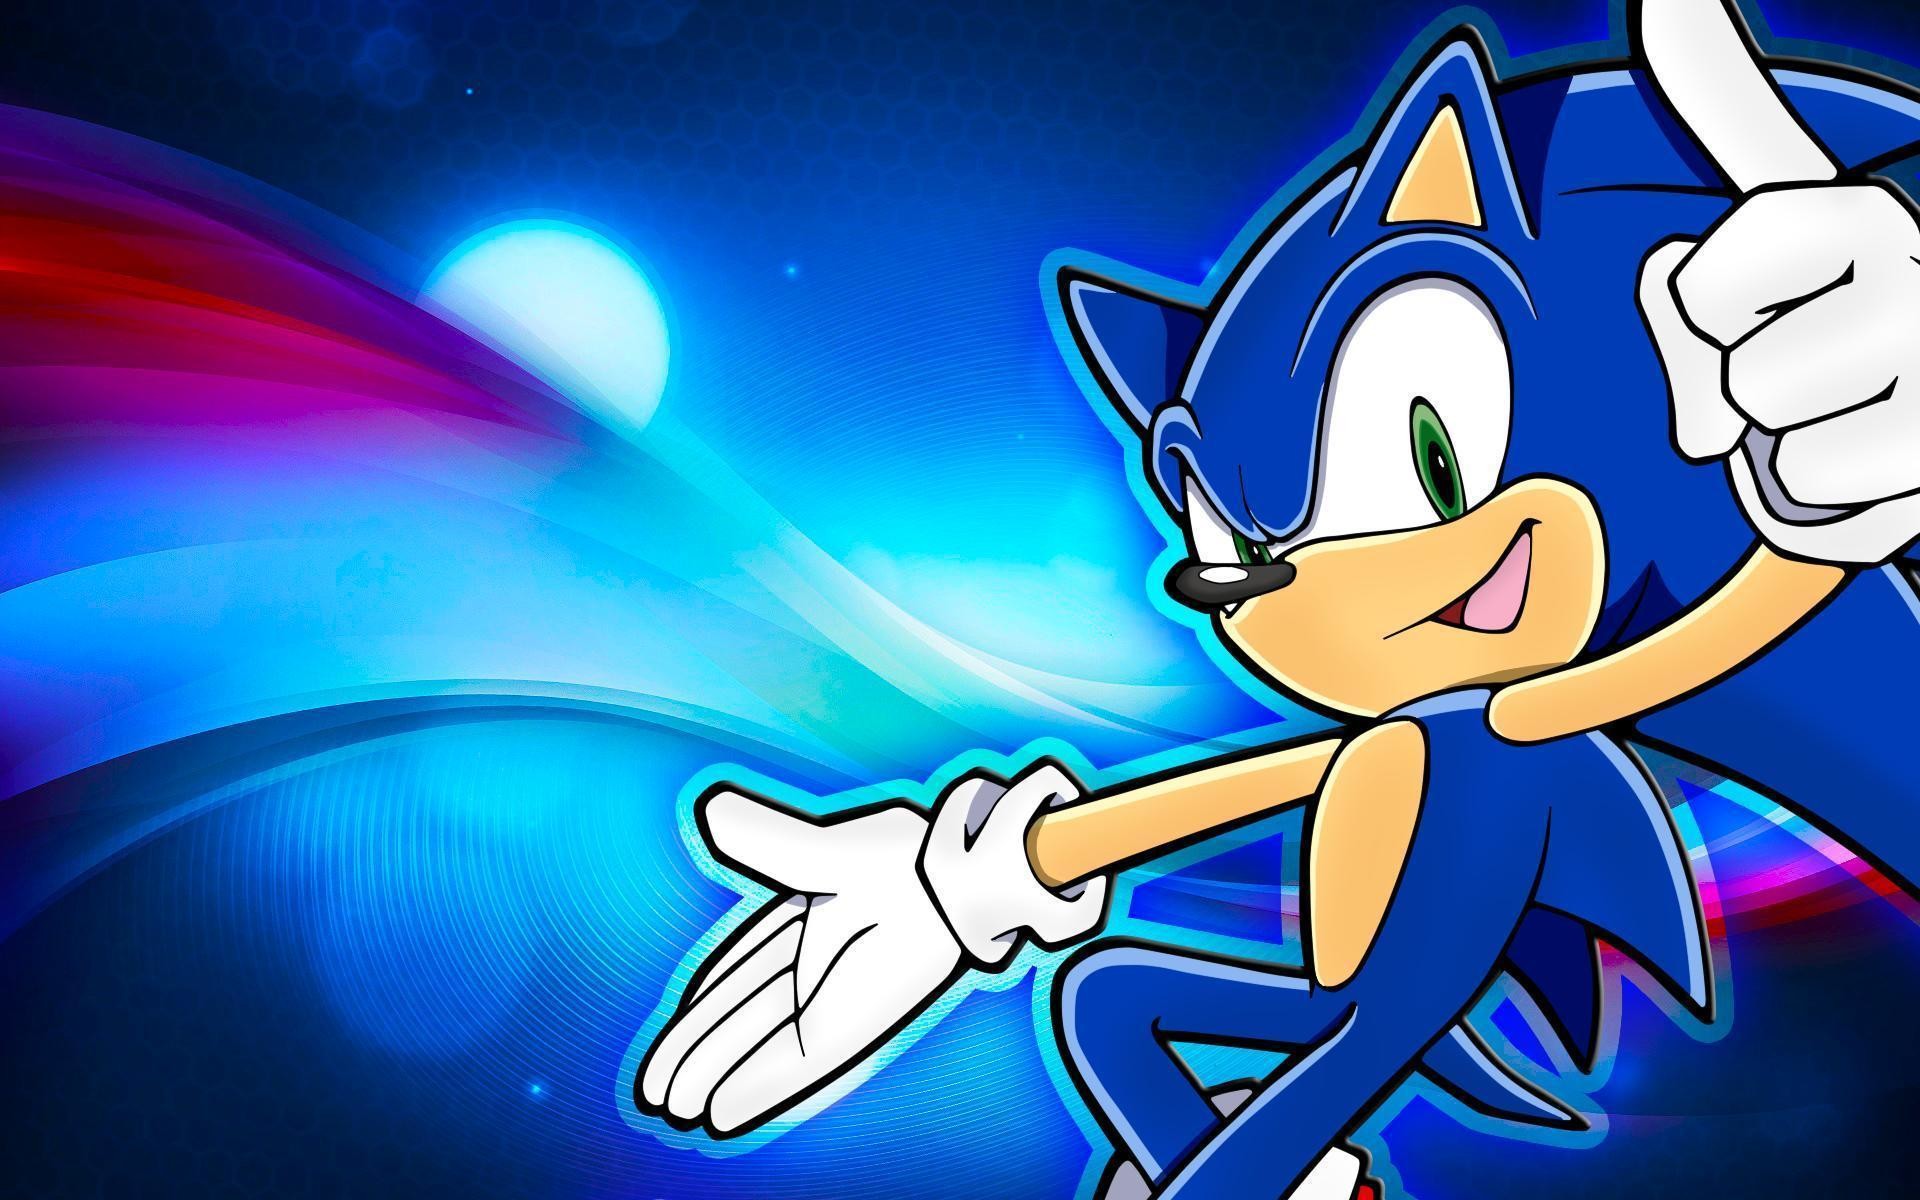 1920x1200 Sonic And Shadow Wallpaper, HD Sonic And Shadow Wallpapers | Sonic .